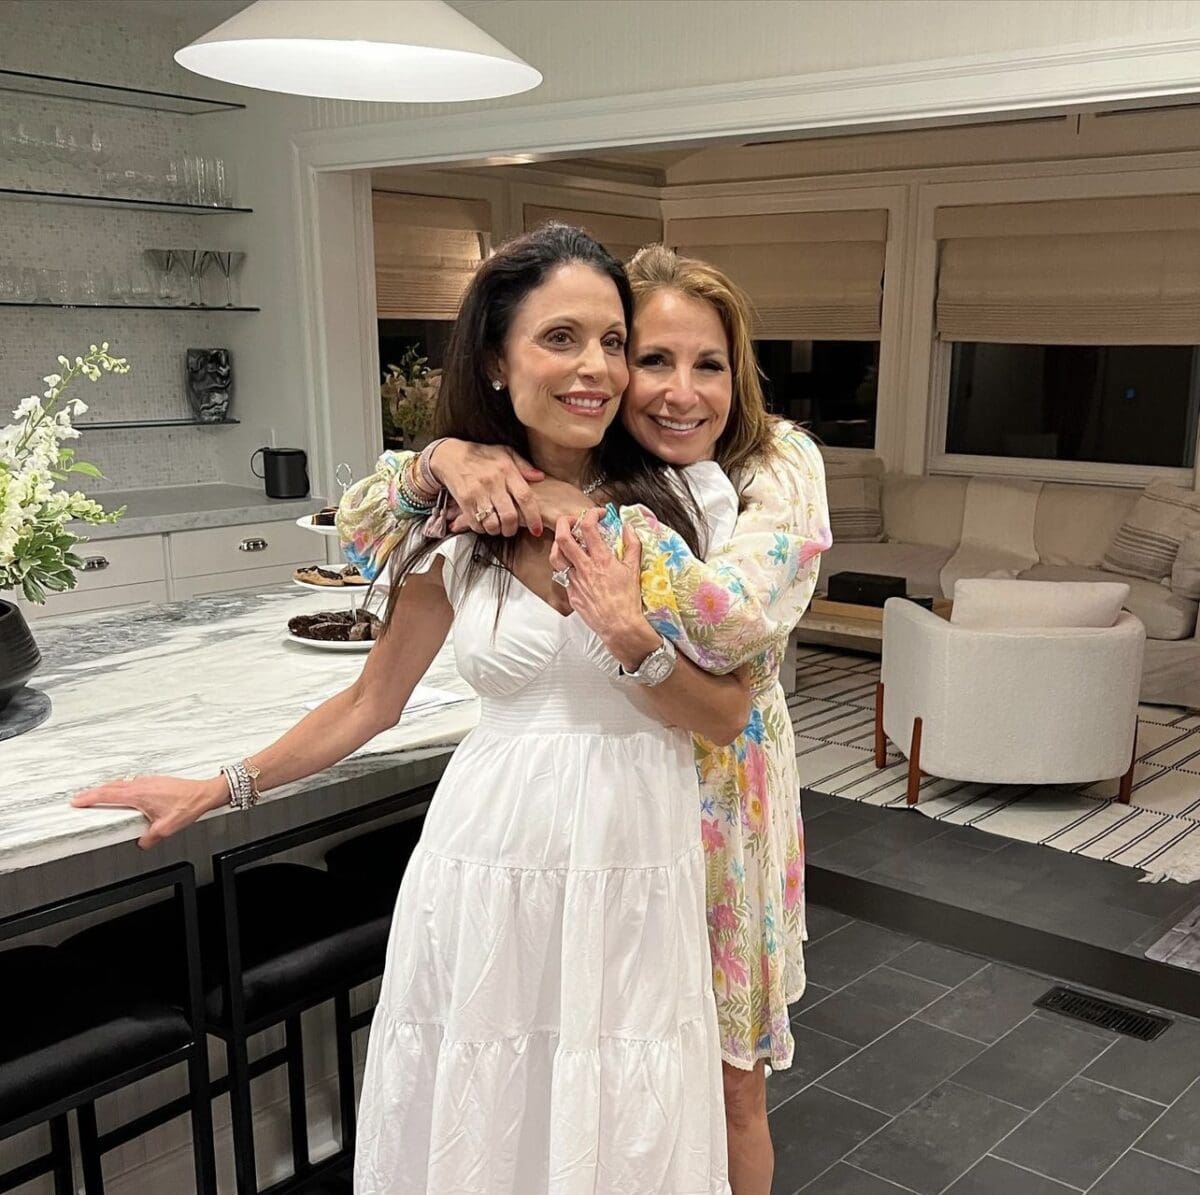 RHONY alums Jill Zarin and Bethenny Frankel Reunite After 10 Years